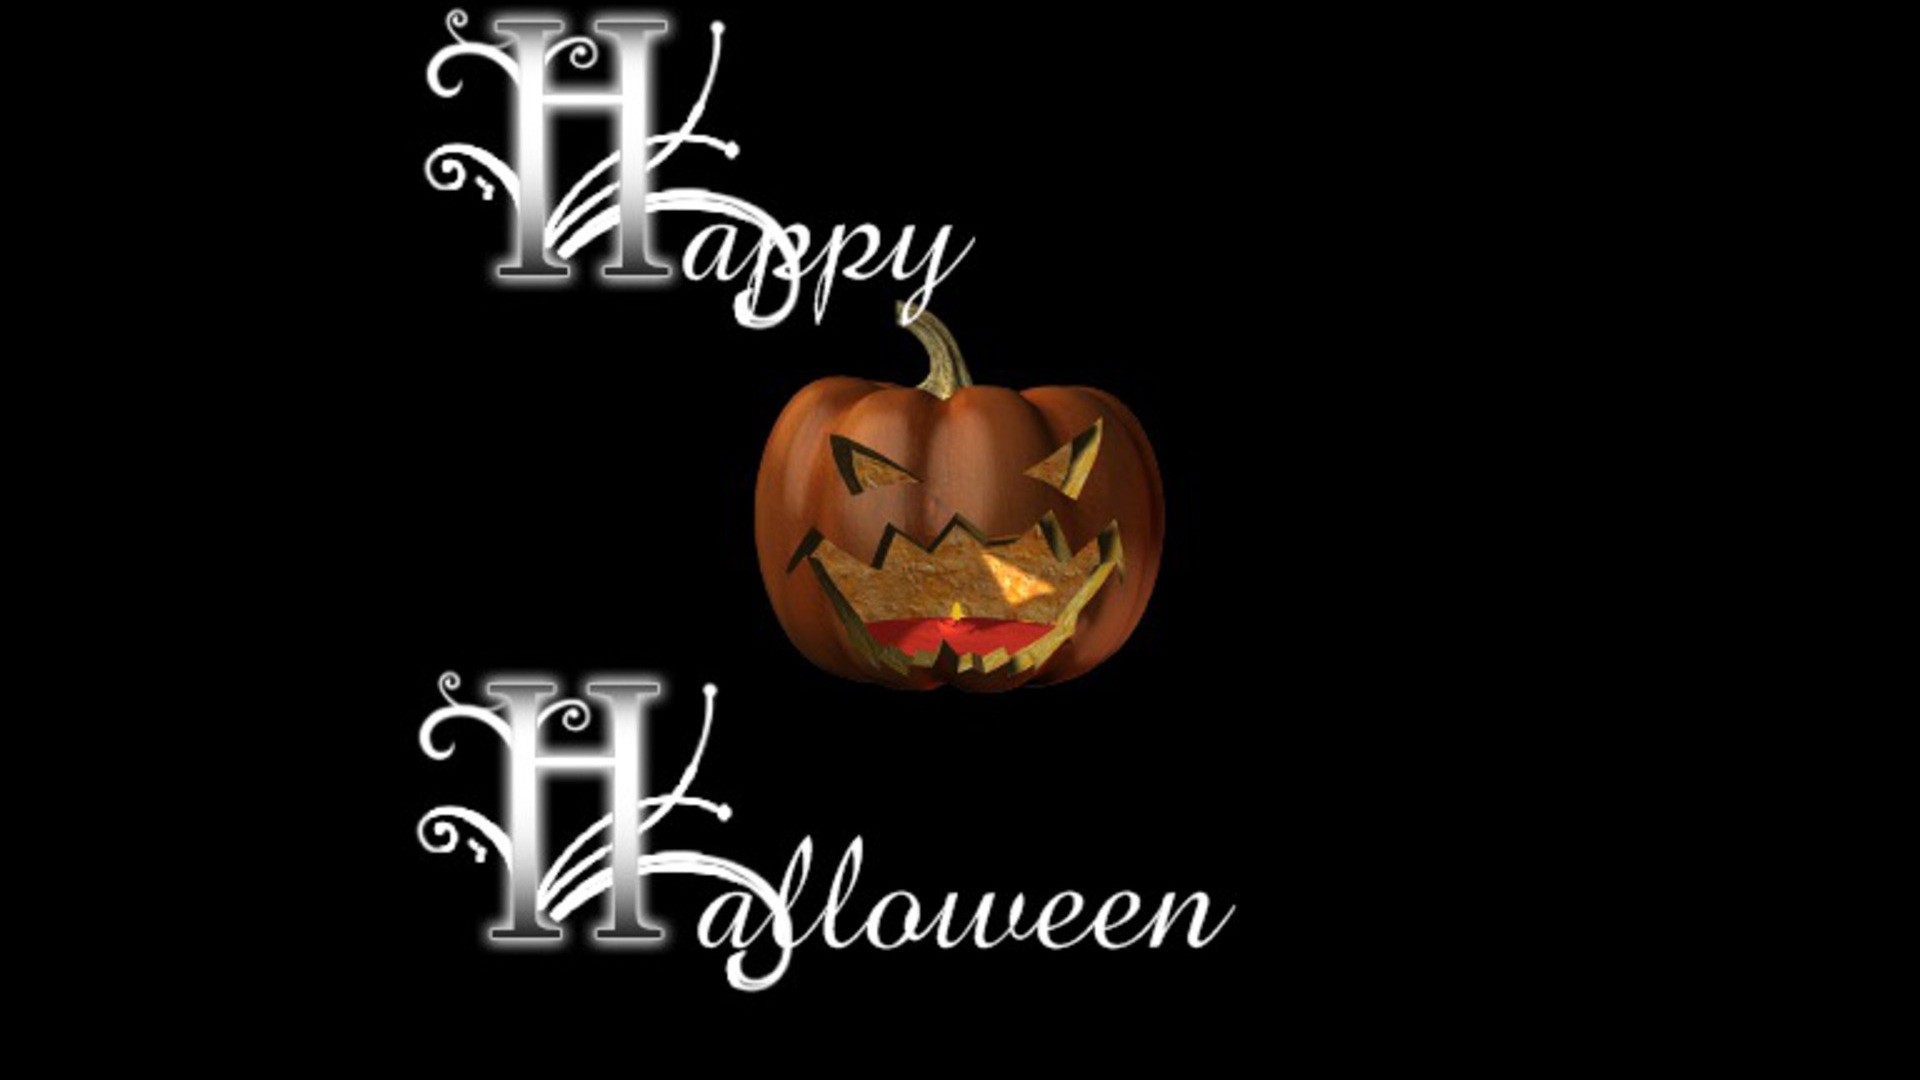 Sexy Halloween Wallpaper For Pc Image